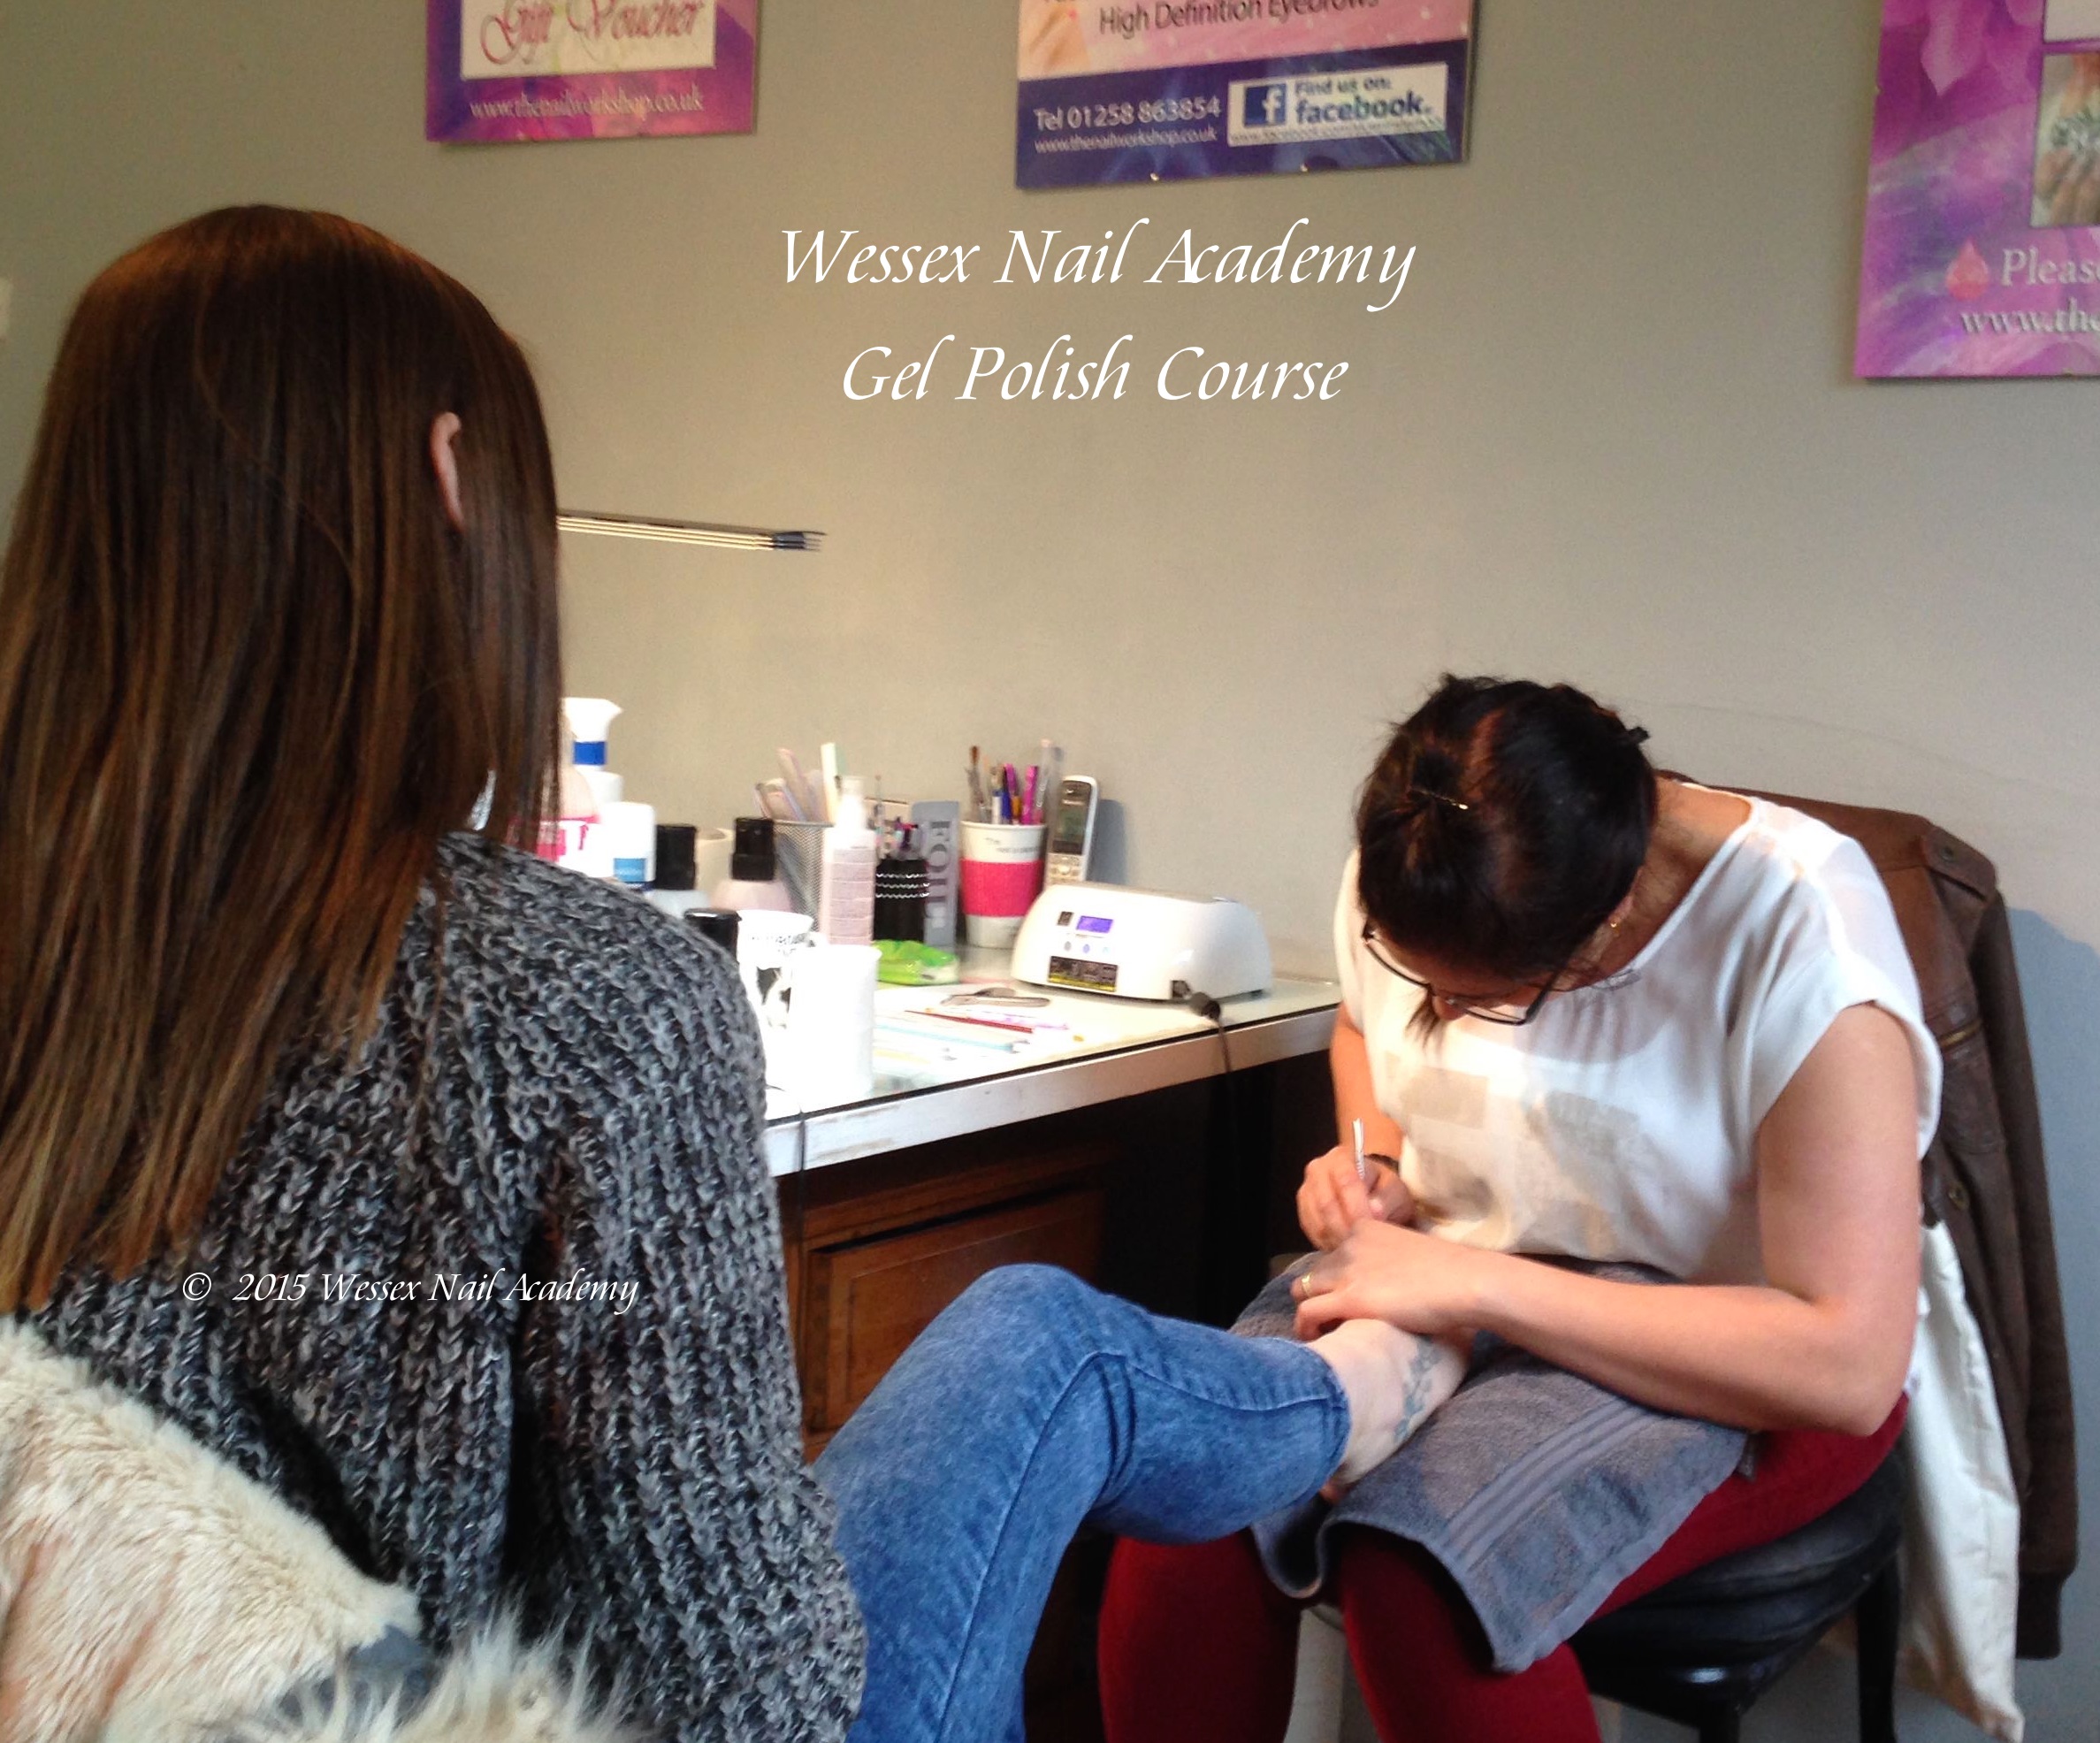 Gel Polish Beginners Manicure and Pedicure Courses, Nail extension training, nail training course, Wessex Nail Academy Okeford Fitzpaine, Dorset